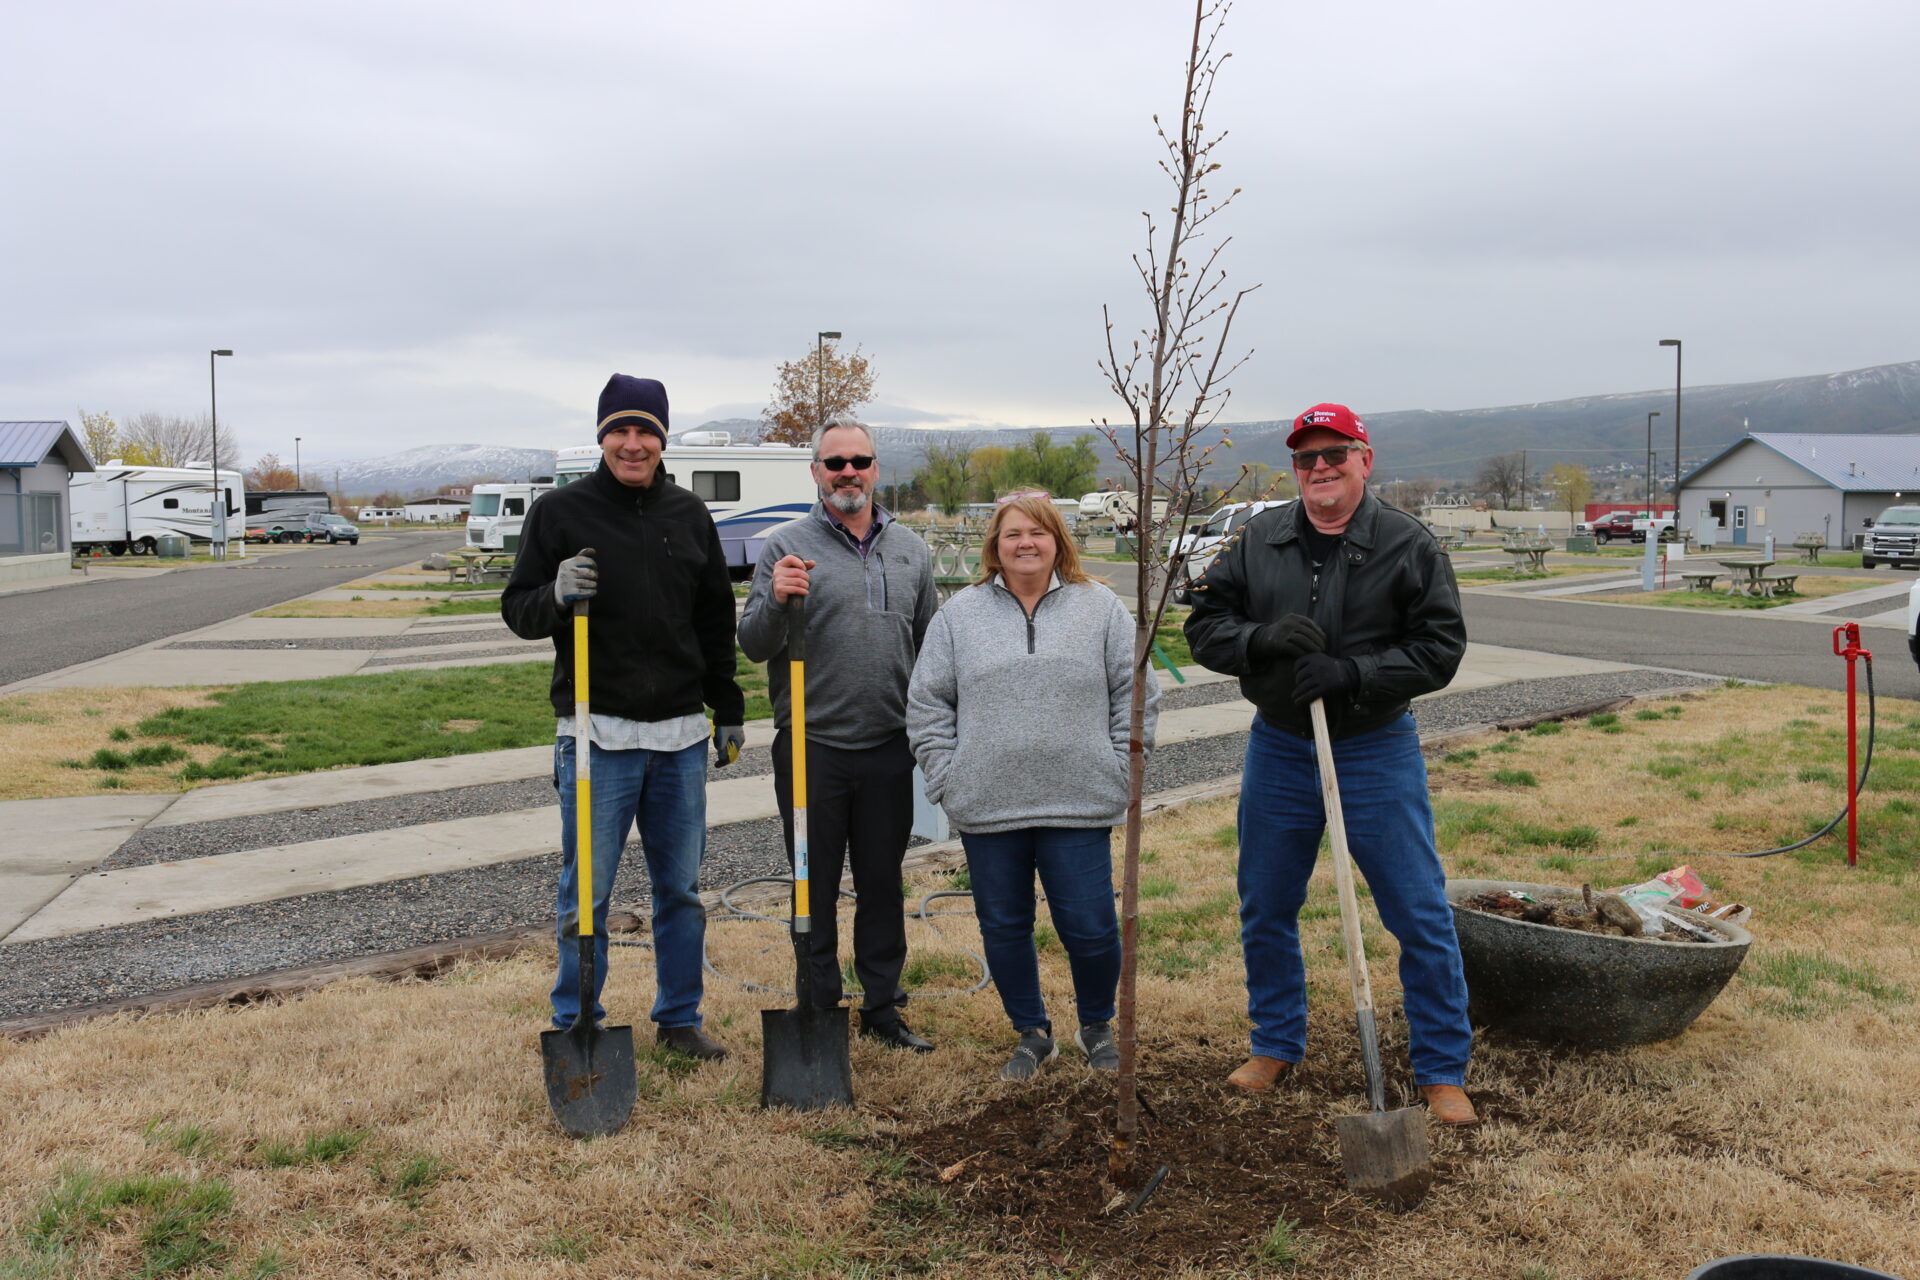 Benton REA planted two threes at Wine Country RV Park on April 13 as a part of the Arbor Day Foundation’s Tree Line USA program. Pictured from left: Brian Cramer, area utility tree coordinator; Troy Berglund, Benton REA vice president of member services; Louann Rockney, Wine Country RV Park manager; Mike Freepons, Benton REA trustee.